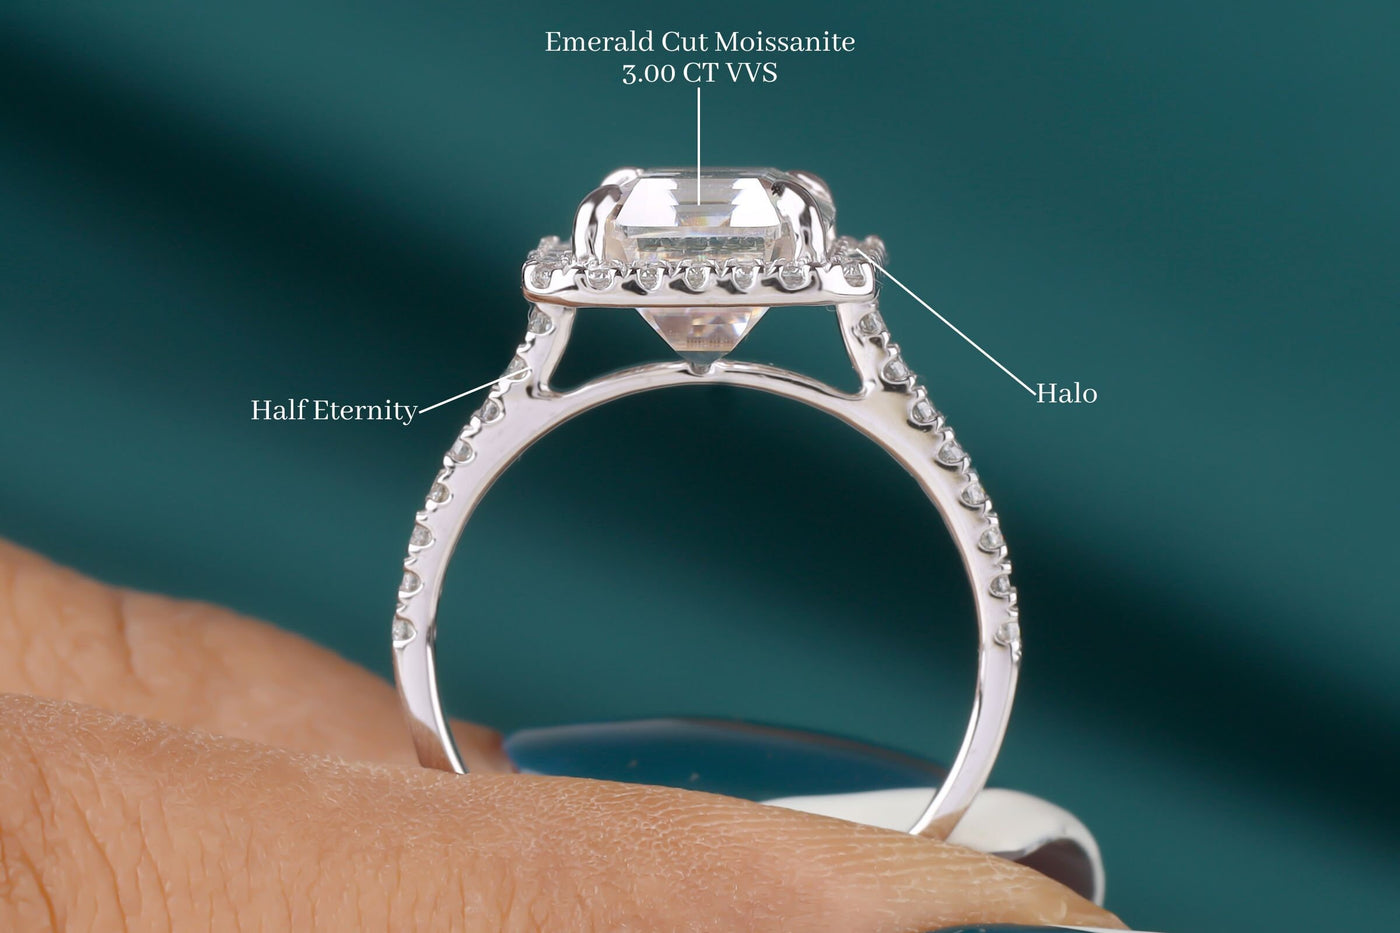 3 CT Emerald Cut Colorless Moissanite Engagement Ring. Halo Moissanite Wedding Ring, Solid 14K White Gold Ring, Anniversary Ring For Women